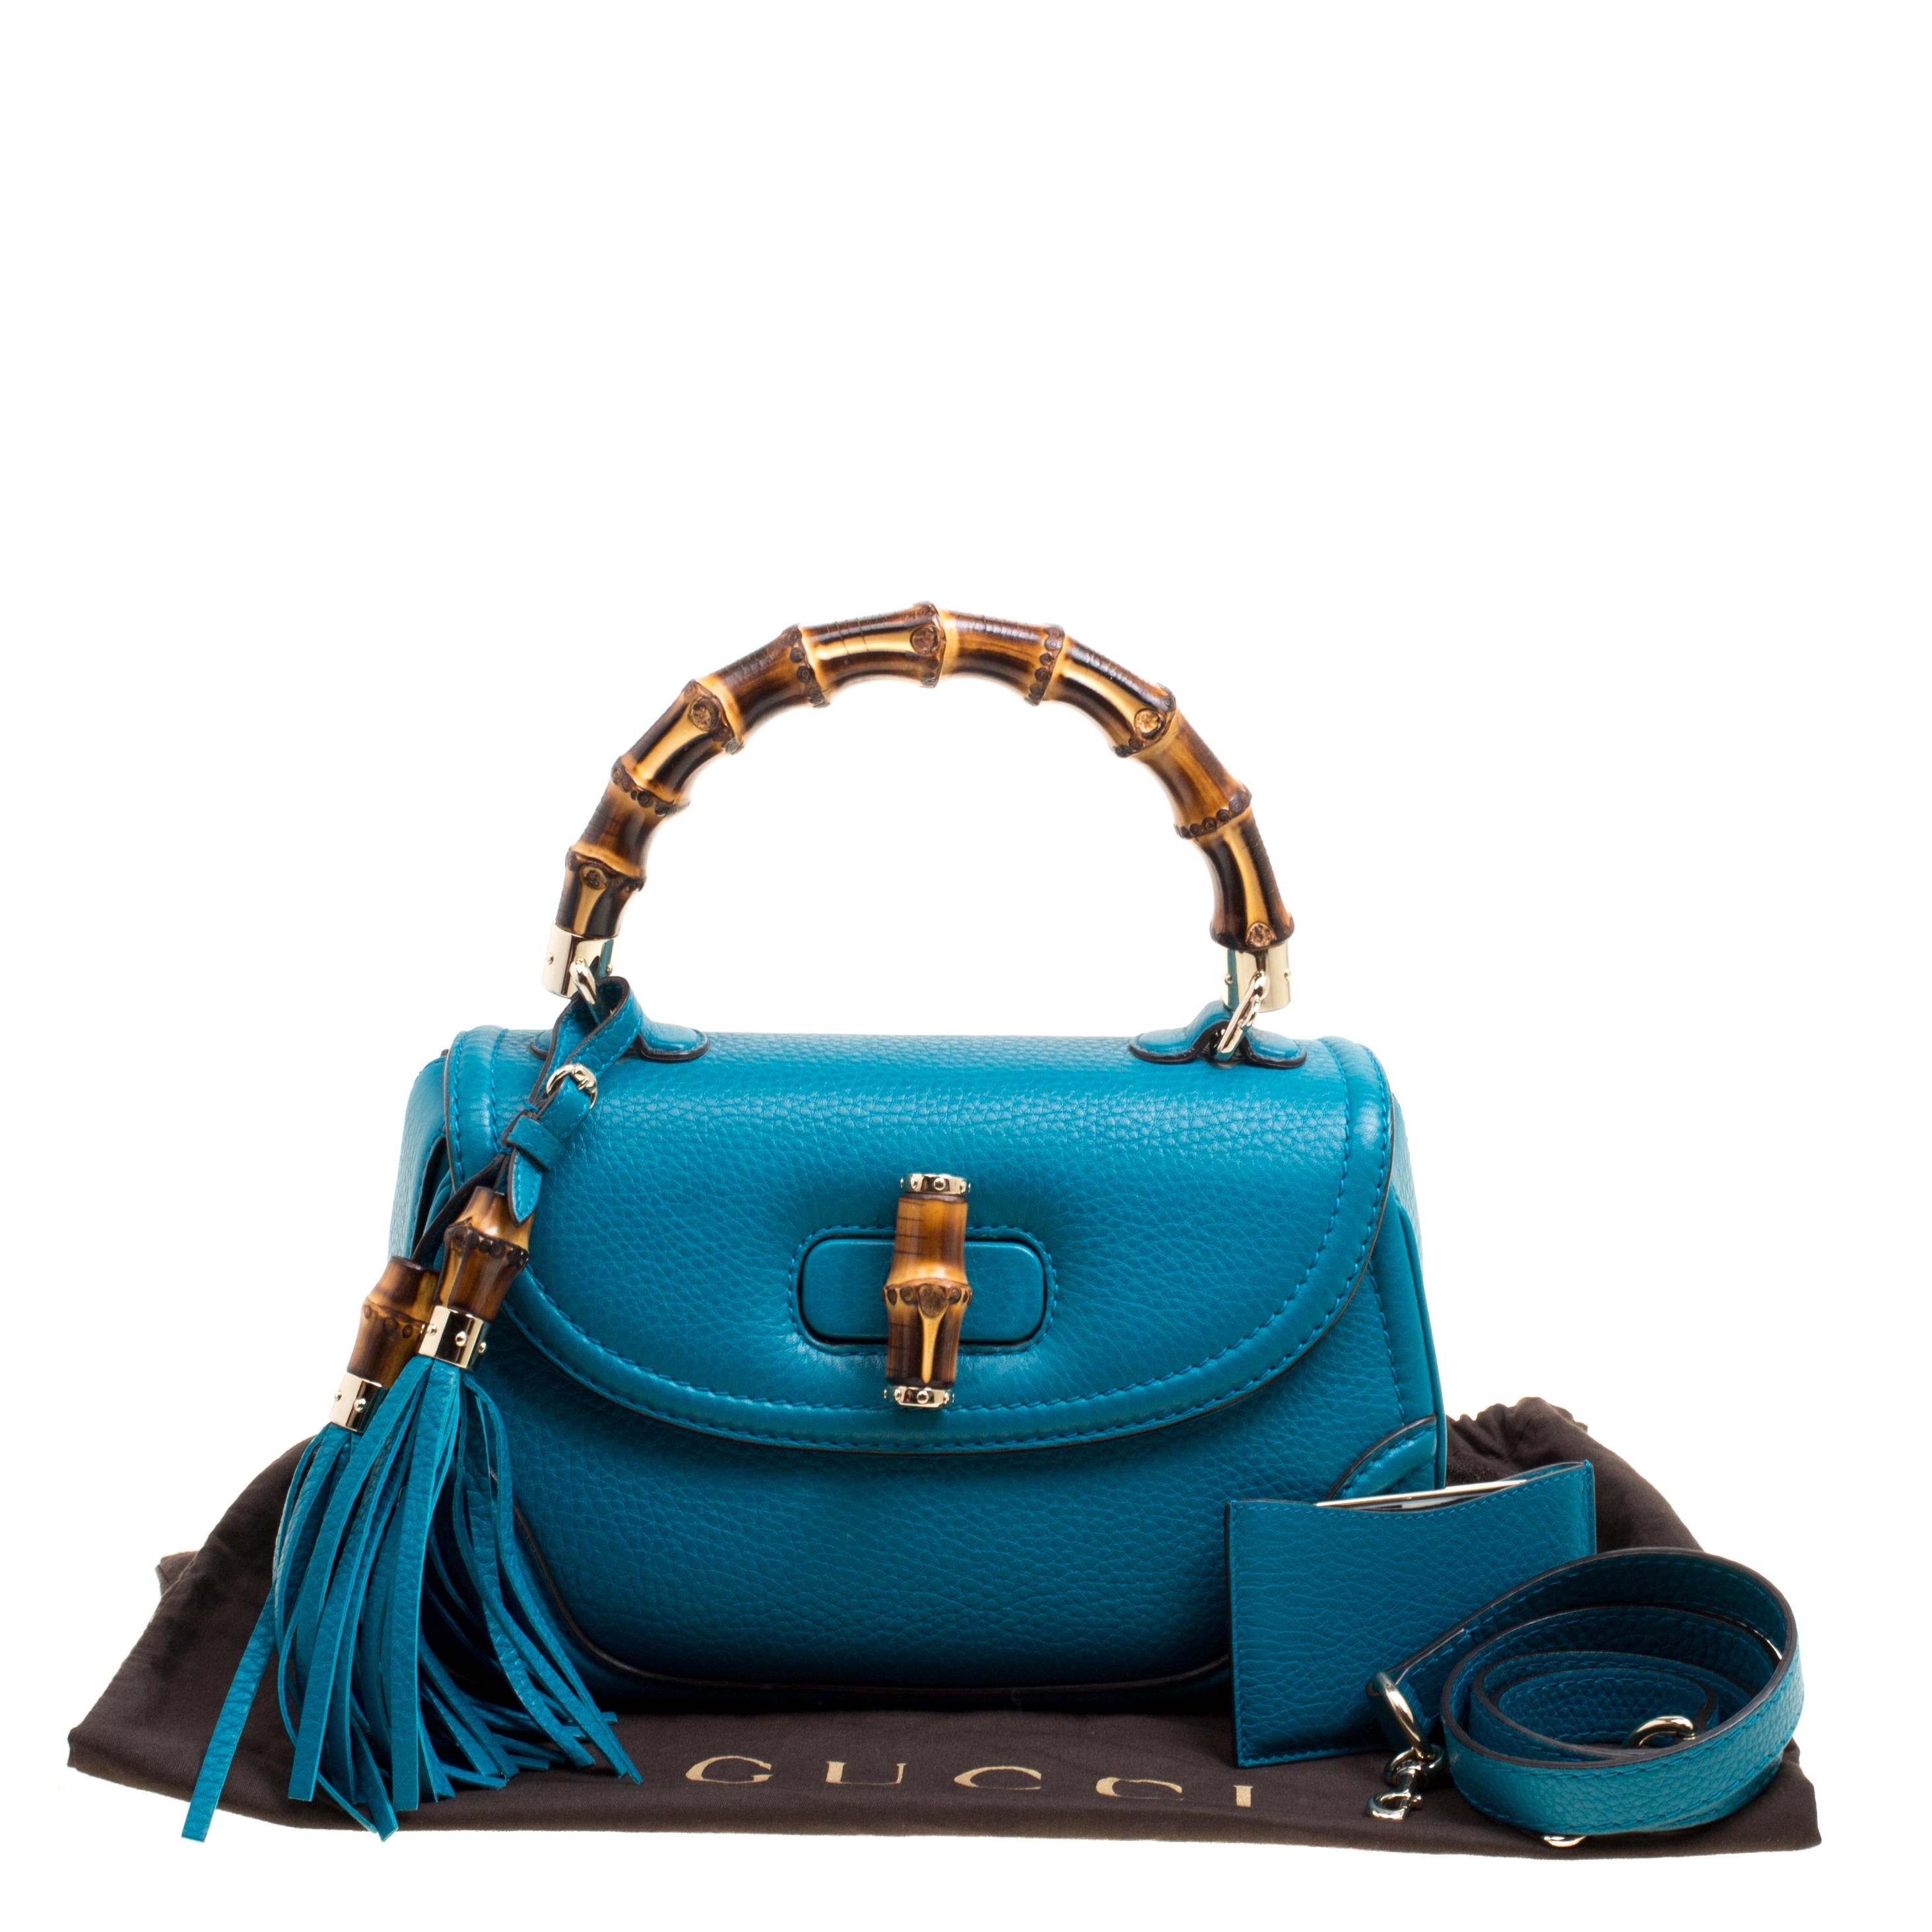 Gucci Teal Blue Leather Tassel New Bamboo Top Handle Bag 3